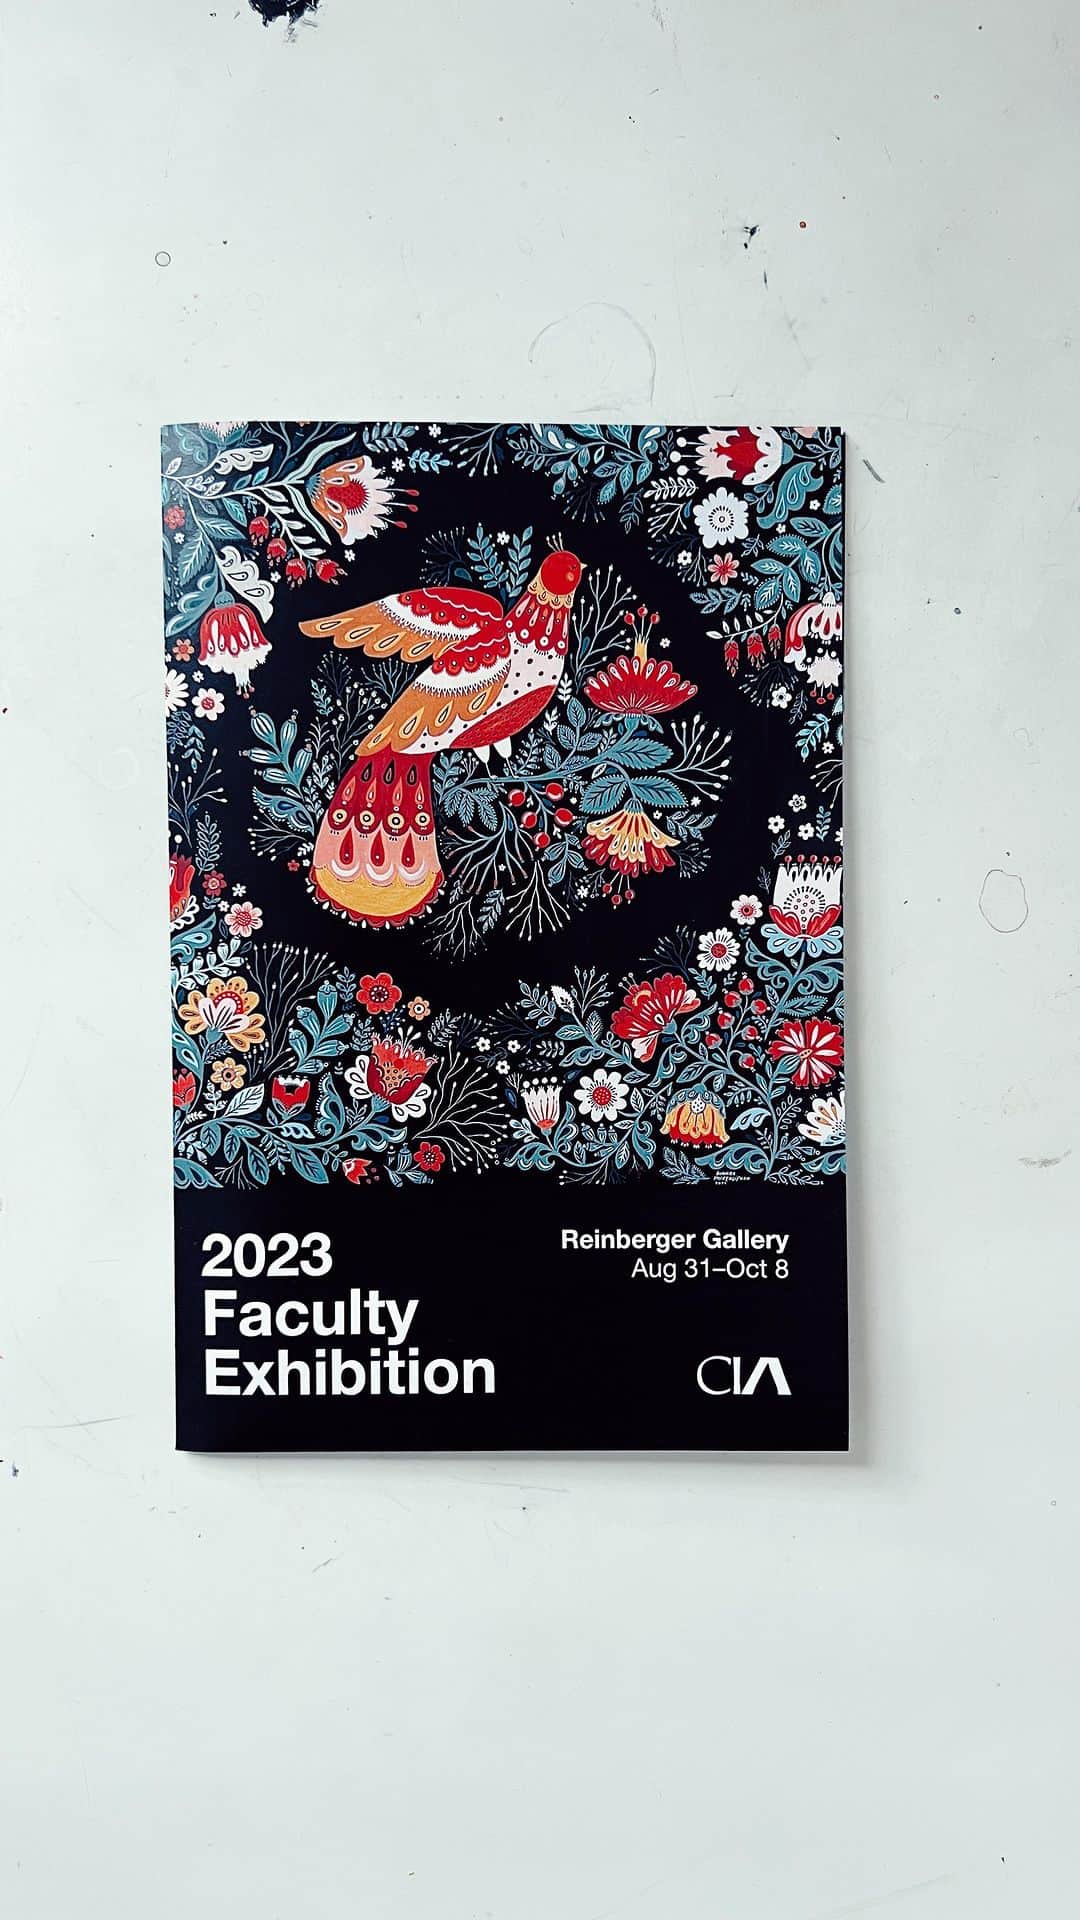 Dinara Mirtalipovaのインスタグラム：「And just like that the CIA Faculty exhibit is over, thank you to everyone who came #reinbergergallery #mirdinaragallery」